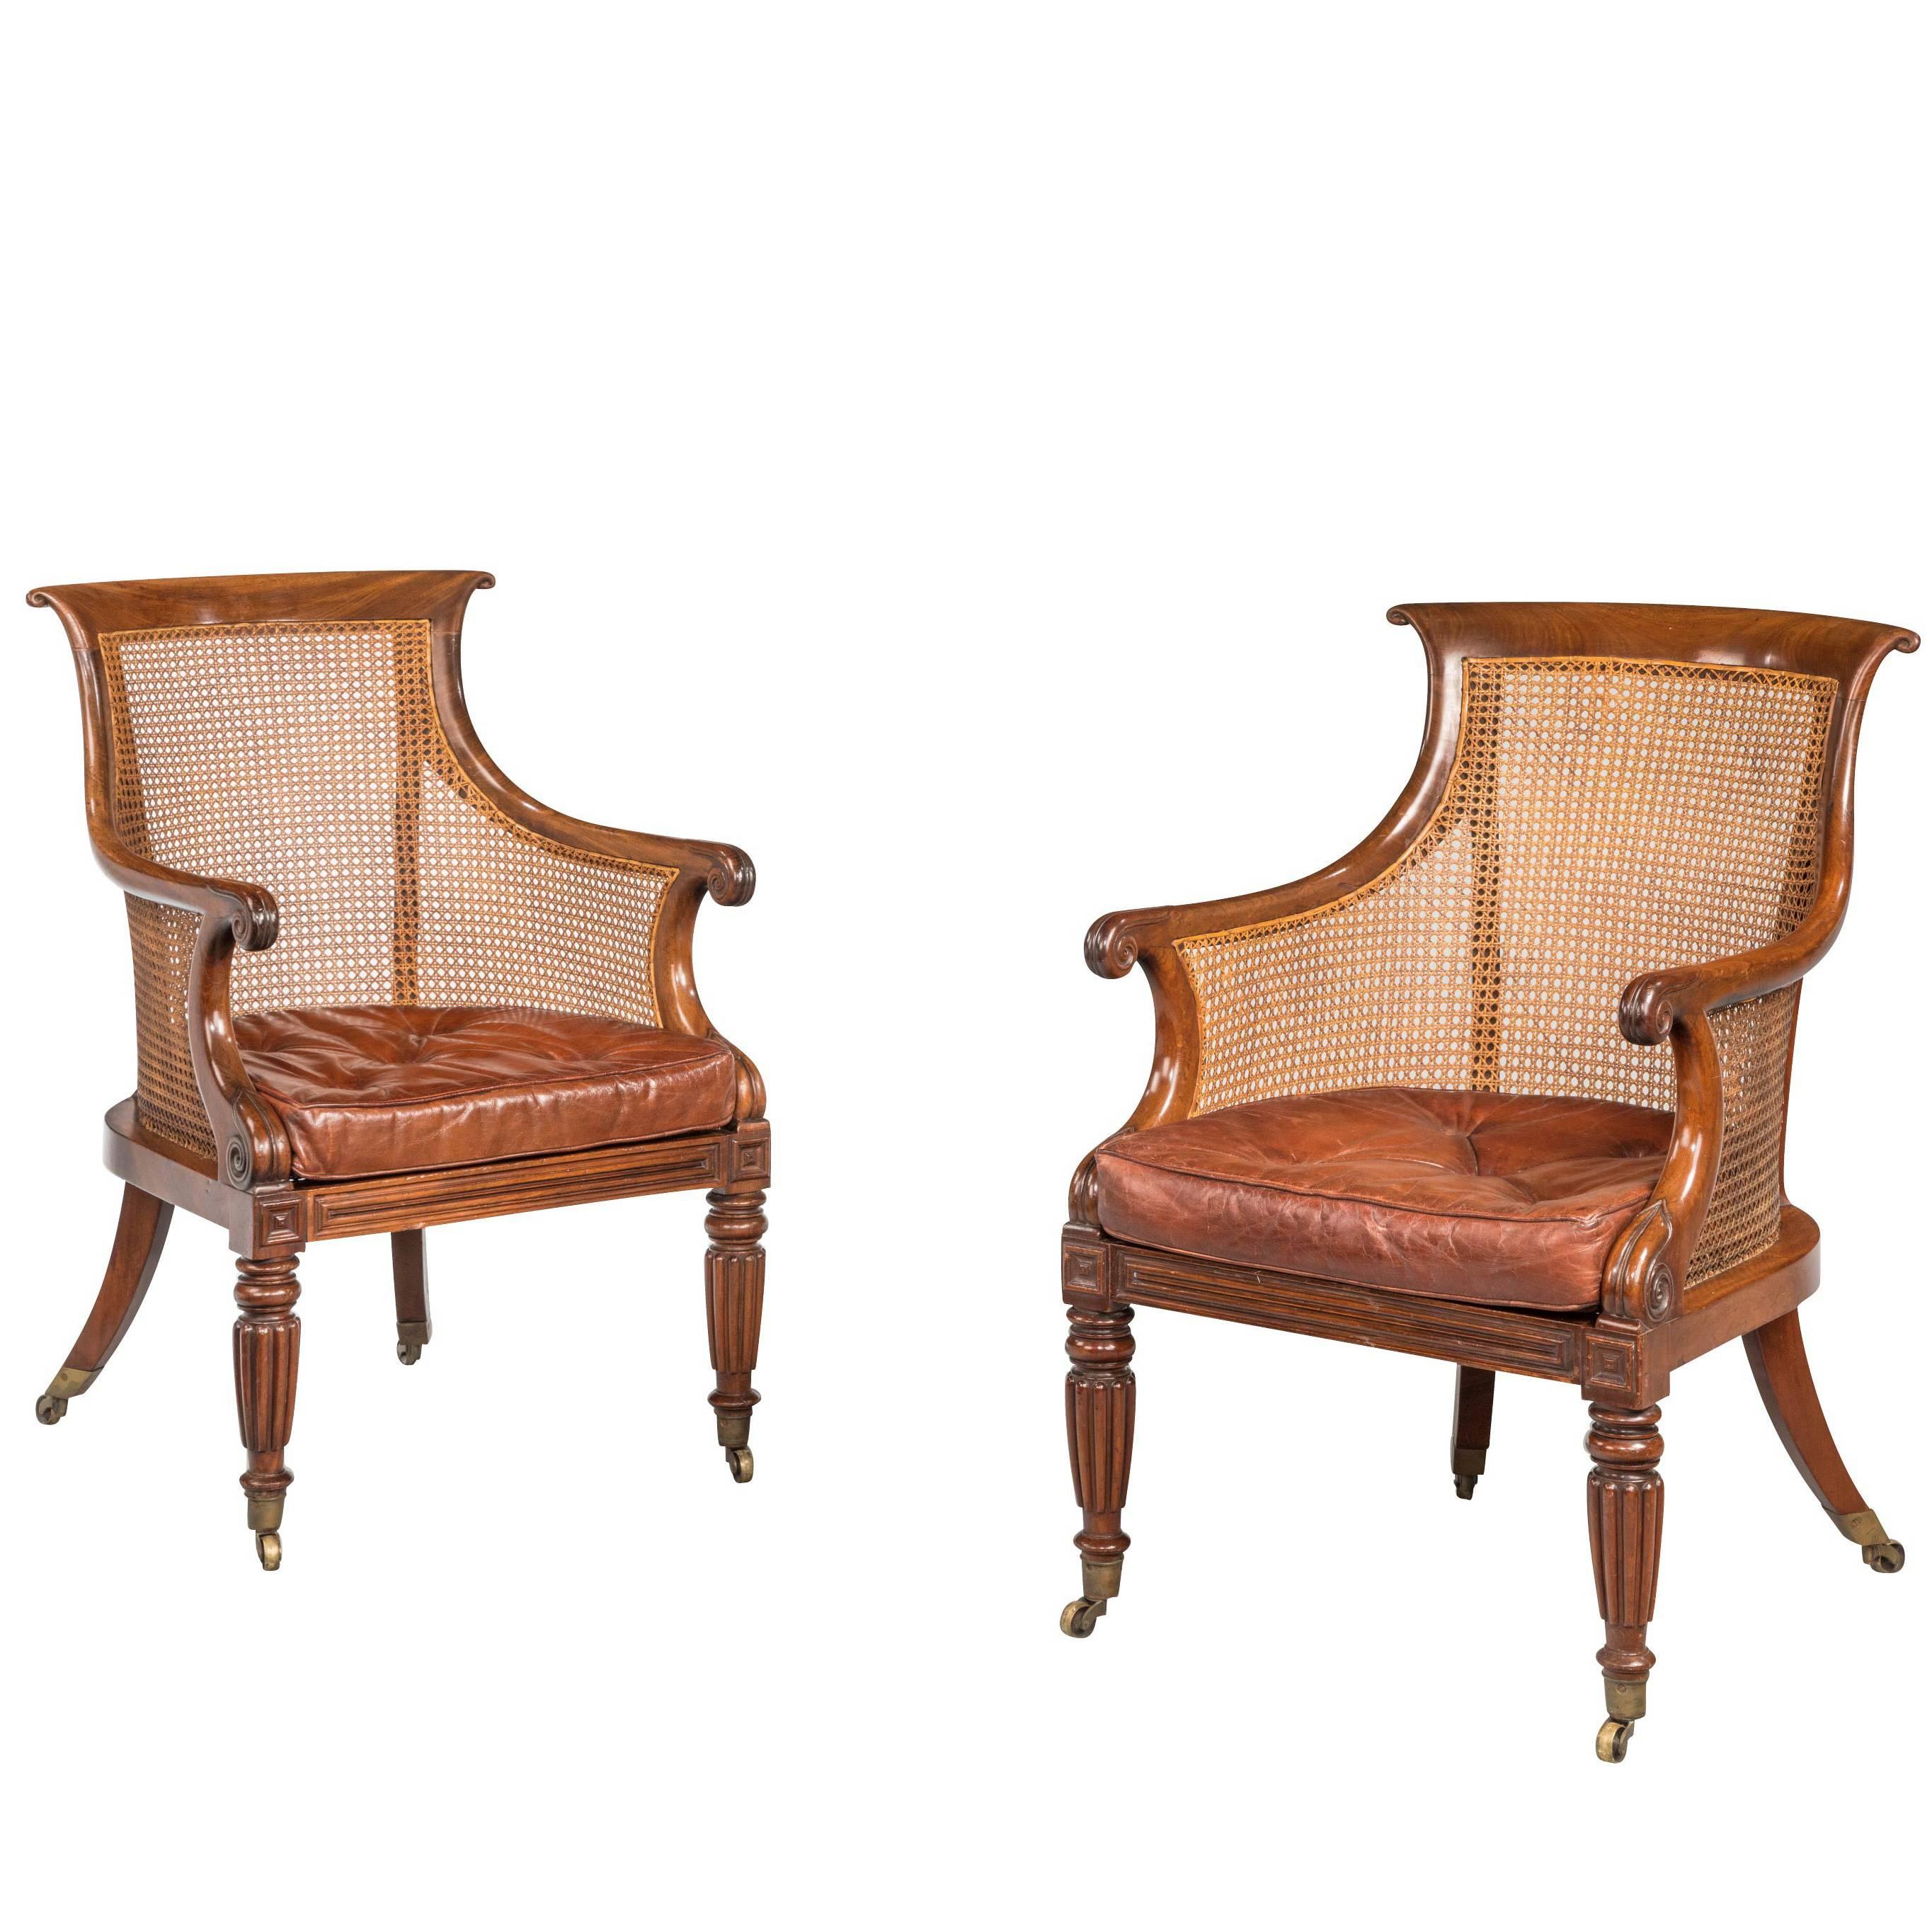 Pair of Regency Period Bergère Library Chairs with Swept Arms